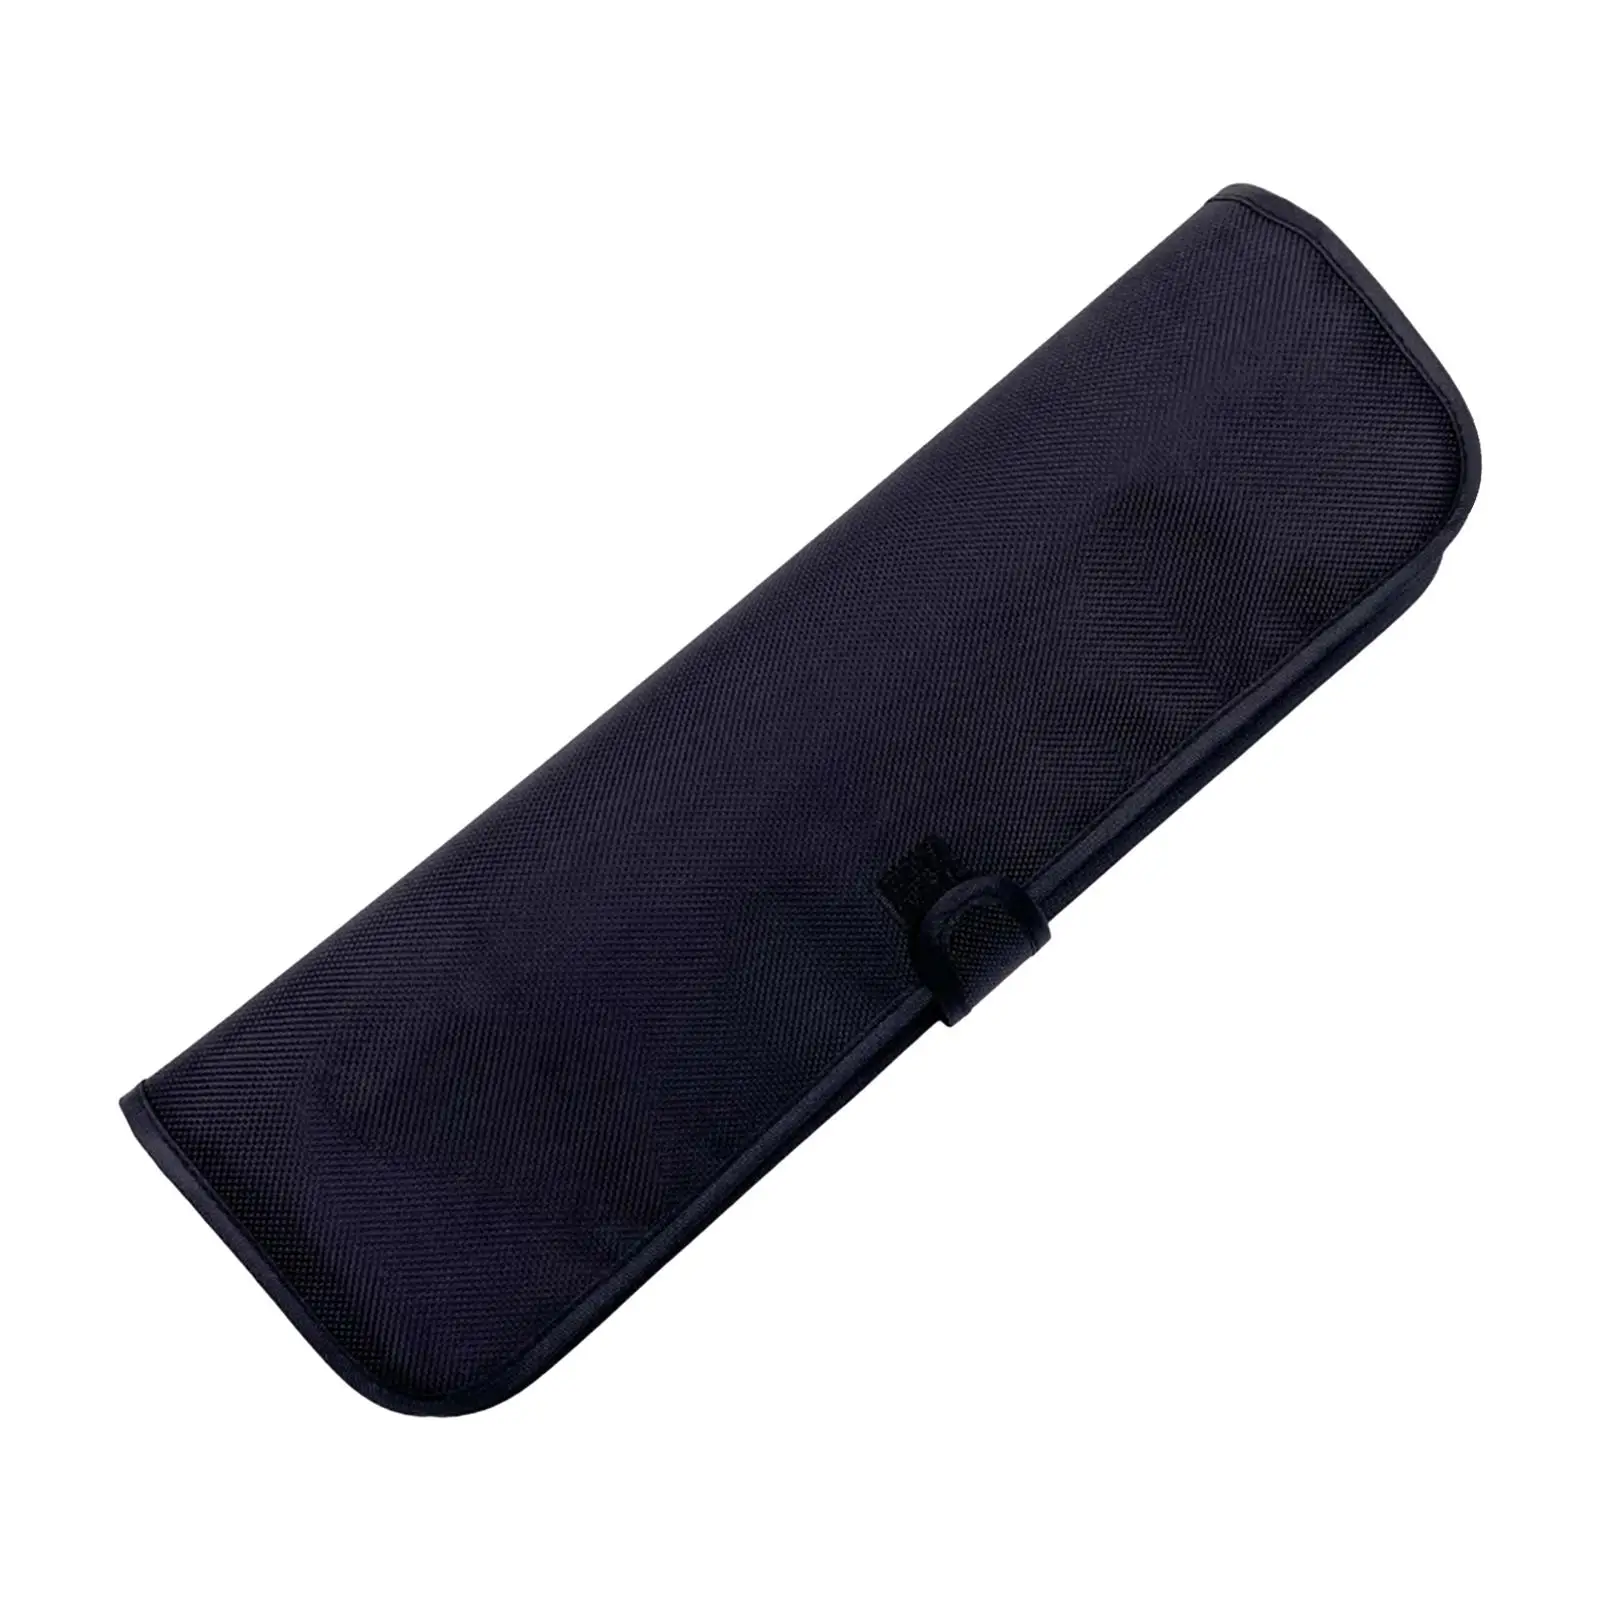 Curling Iron Cover Sleeve Accessory Professional Hair Tools Travel Bag for Curling Iron Combs Straighteners Clippers Flat Iron